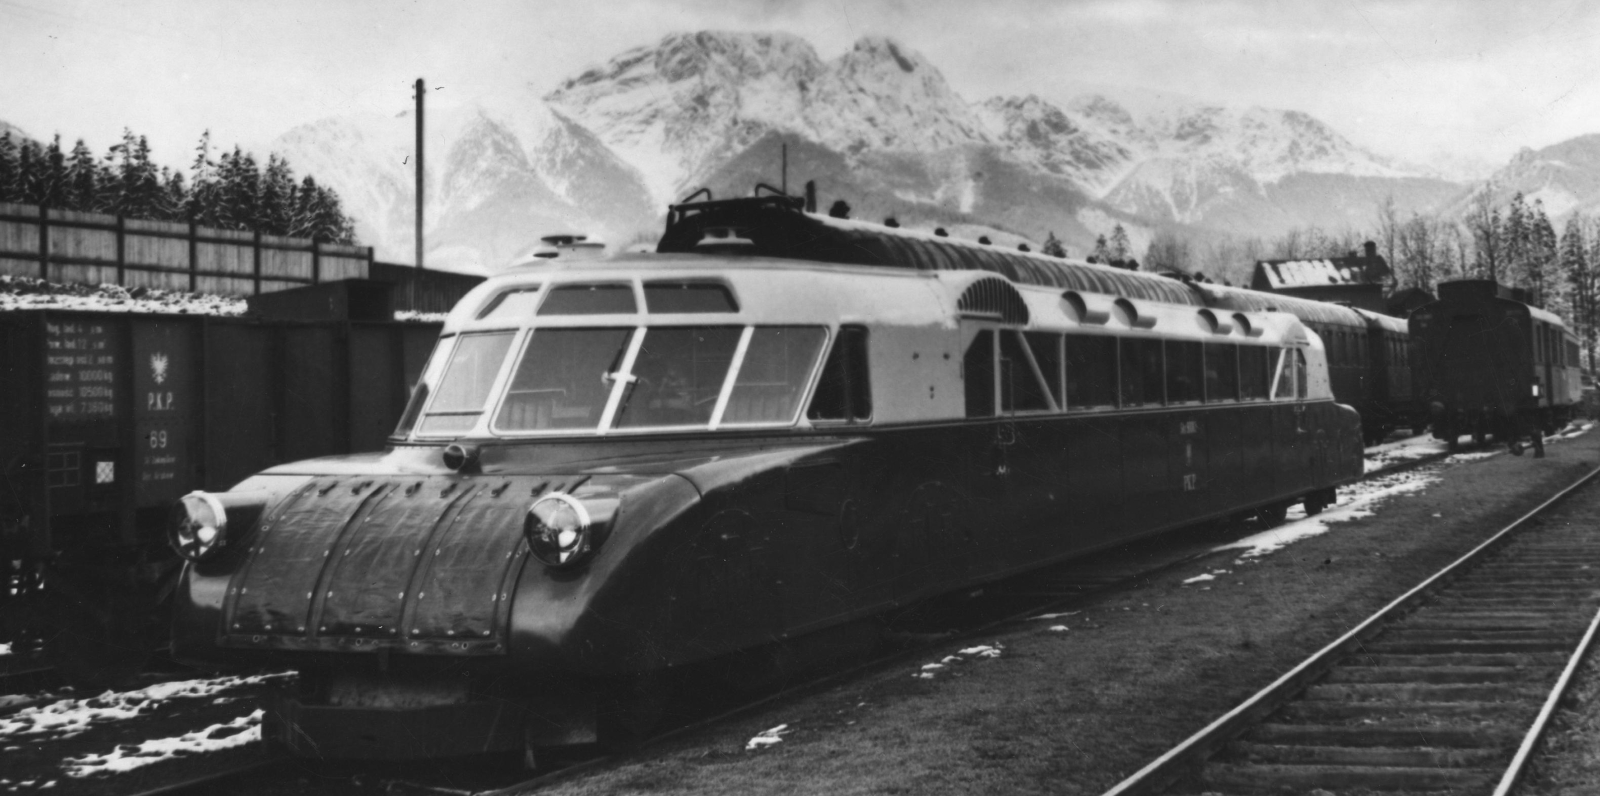 Luxtorpeda in 1936 in Zakopane in front of the 1,895 m () high Giewont